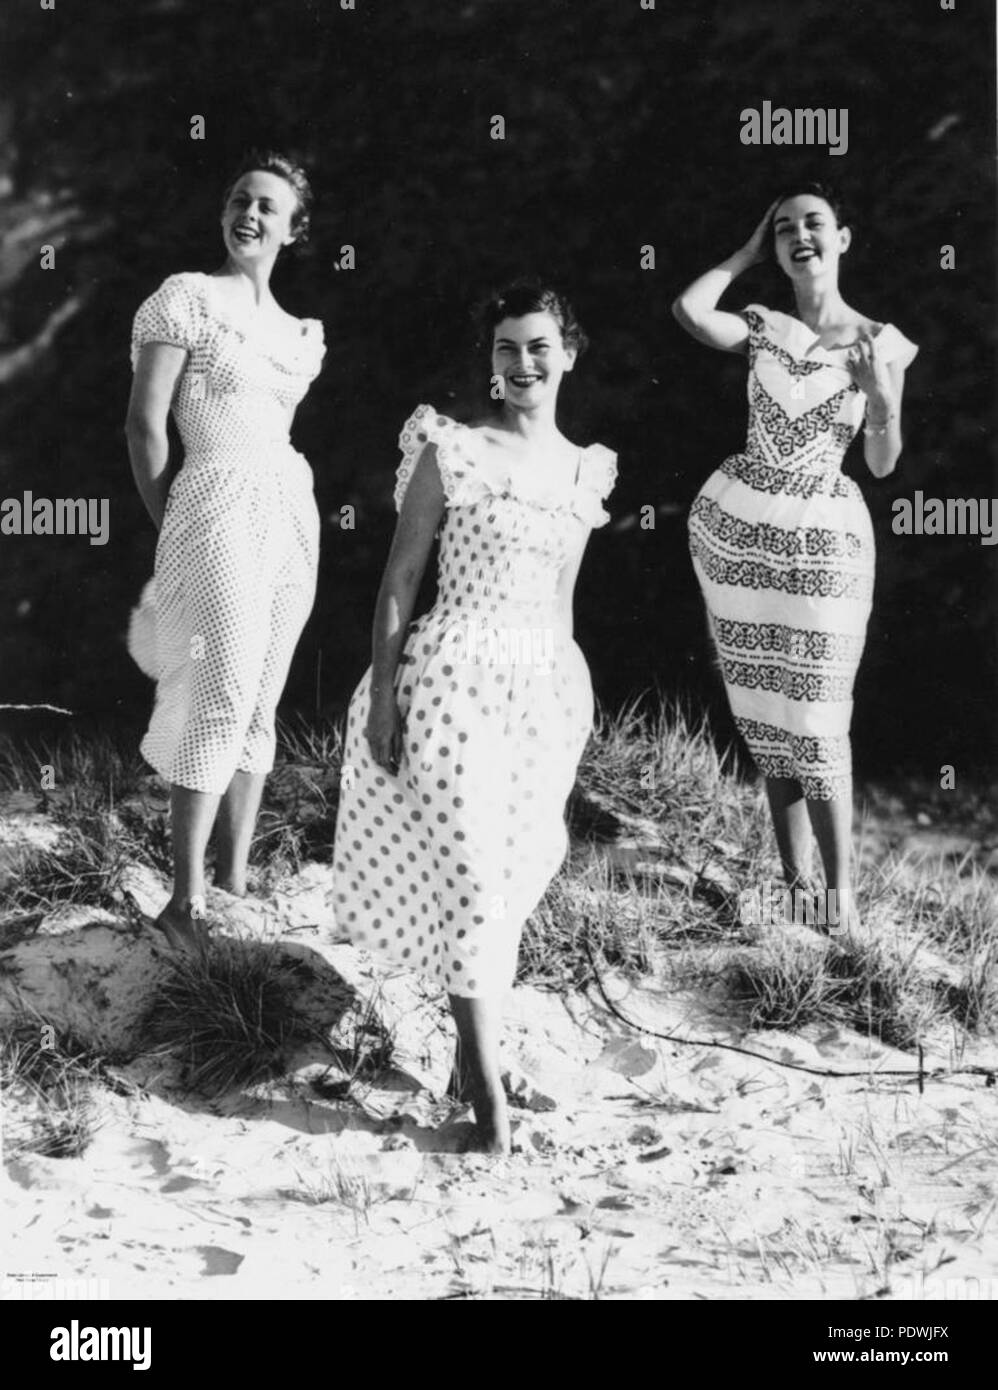 248 StateLibQld 1 198347 Models wearing billowy dresses on the beach at Surfers Paradise, 1951 Stock Photo